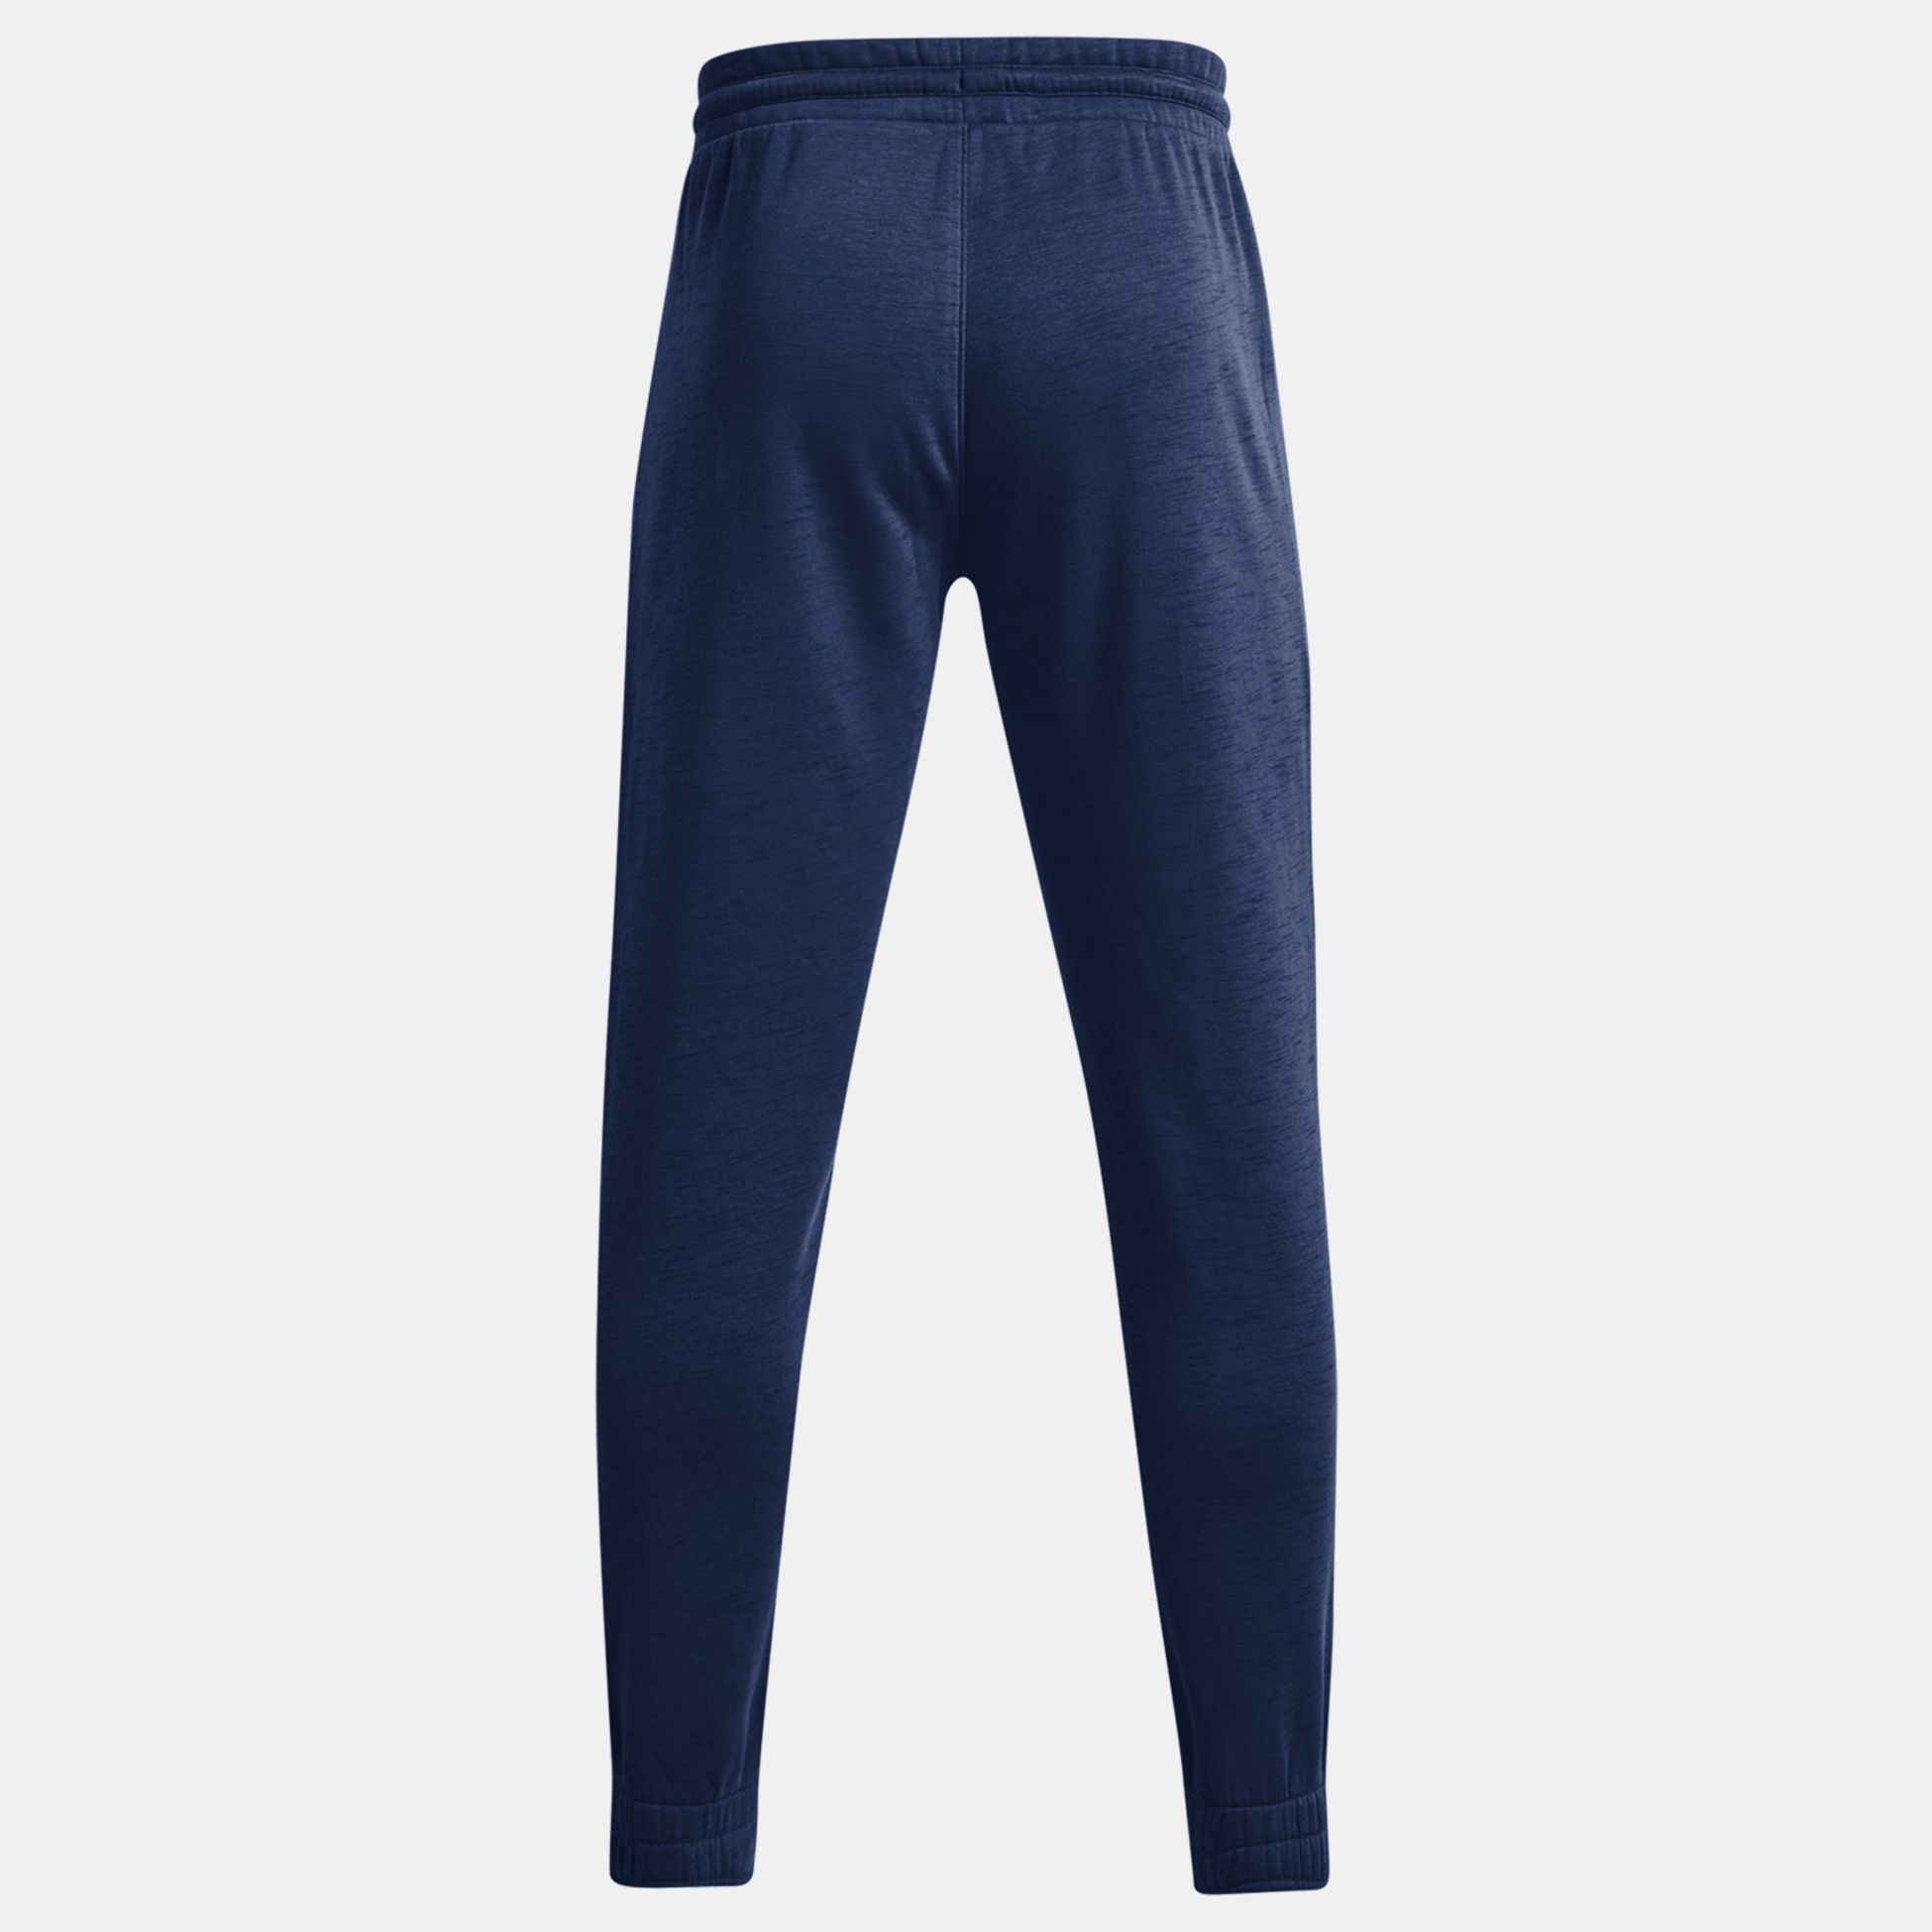 Joggers & Sweatpants -  under armour Project Rock Charged Cotton Fleece Joggers